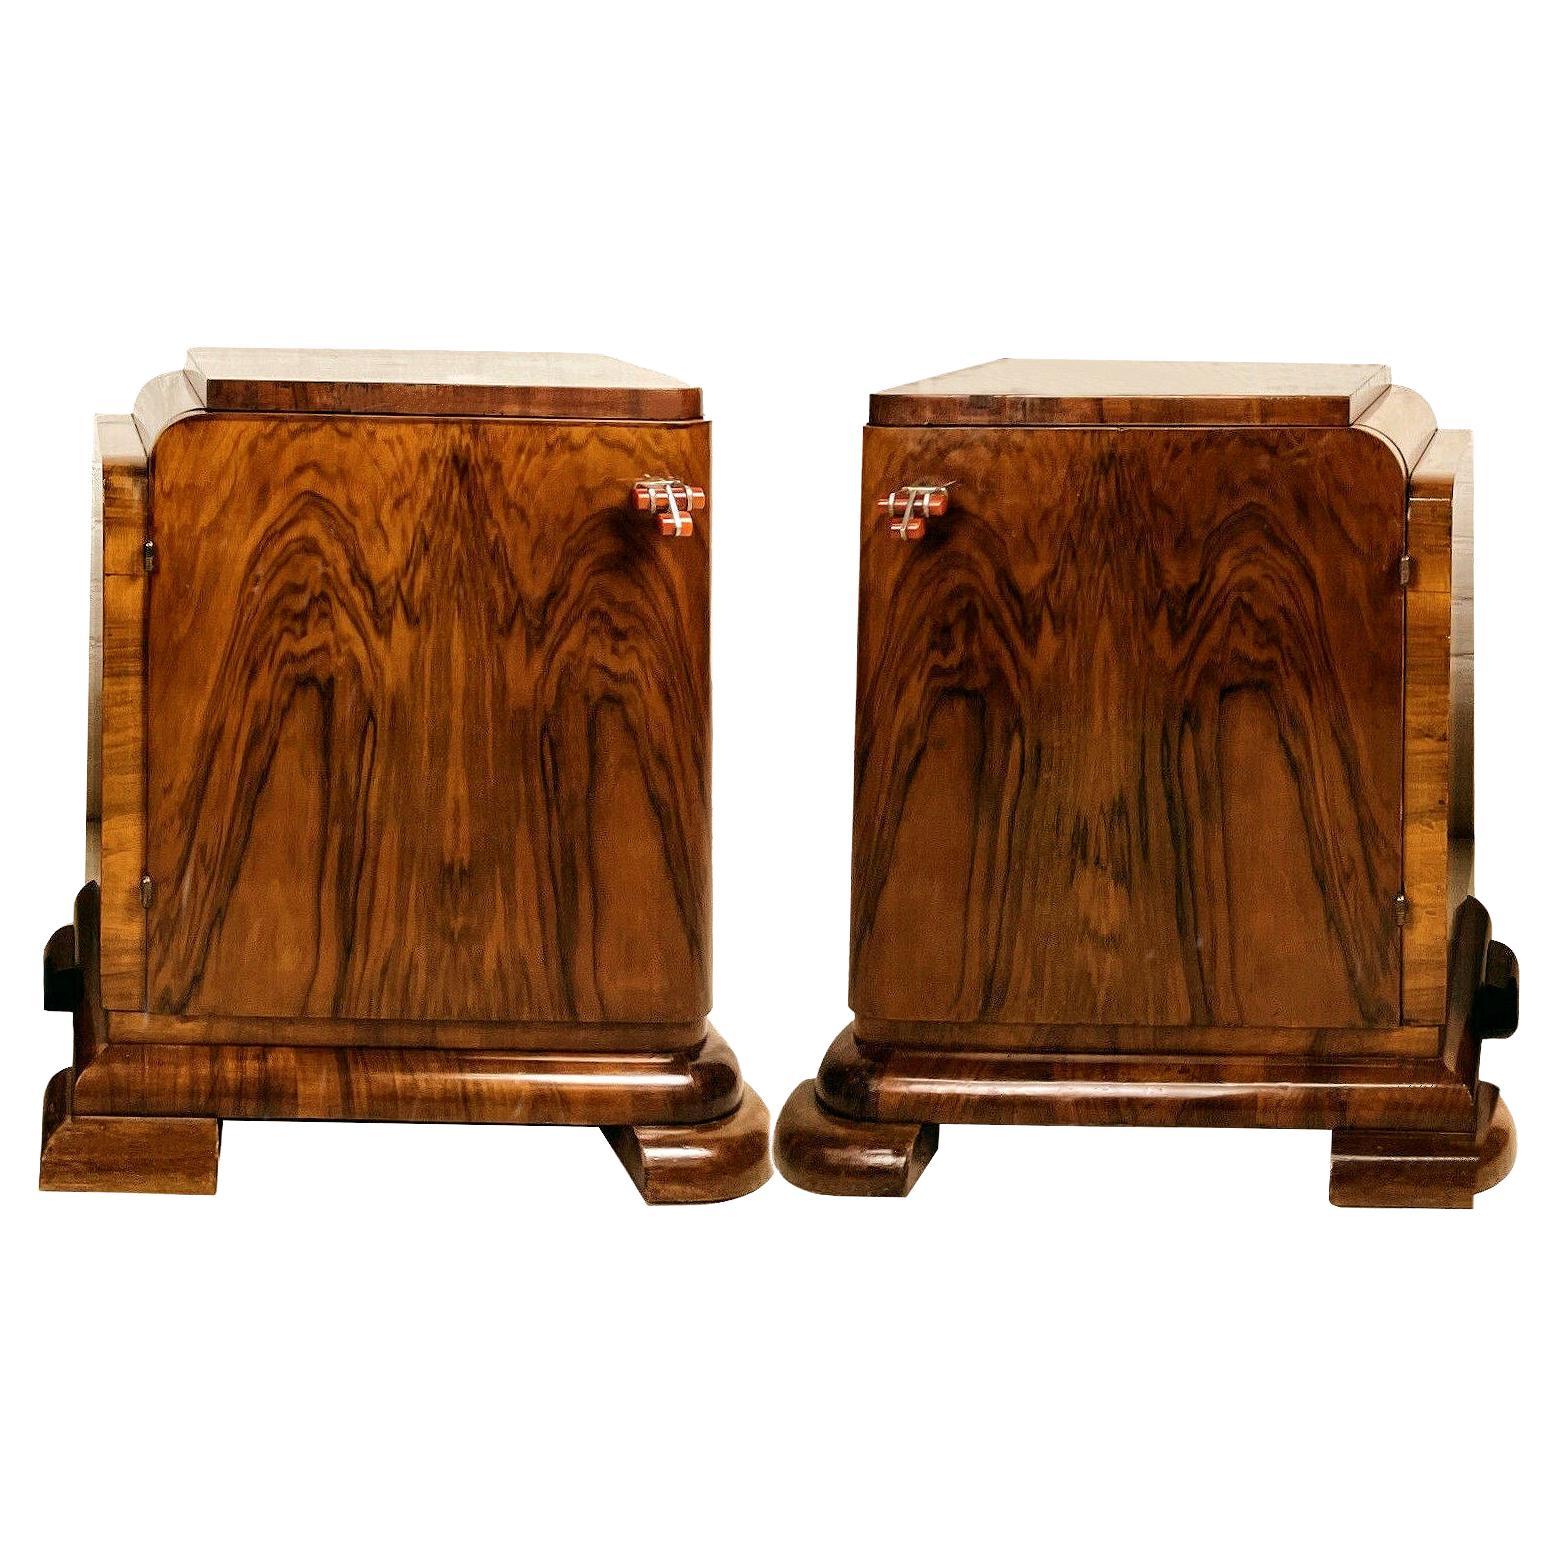 Art Deco Pair of Matching Bedside Table Nightstands in Walnut, c1930